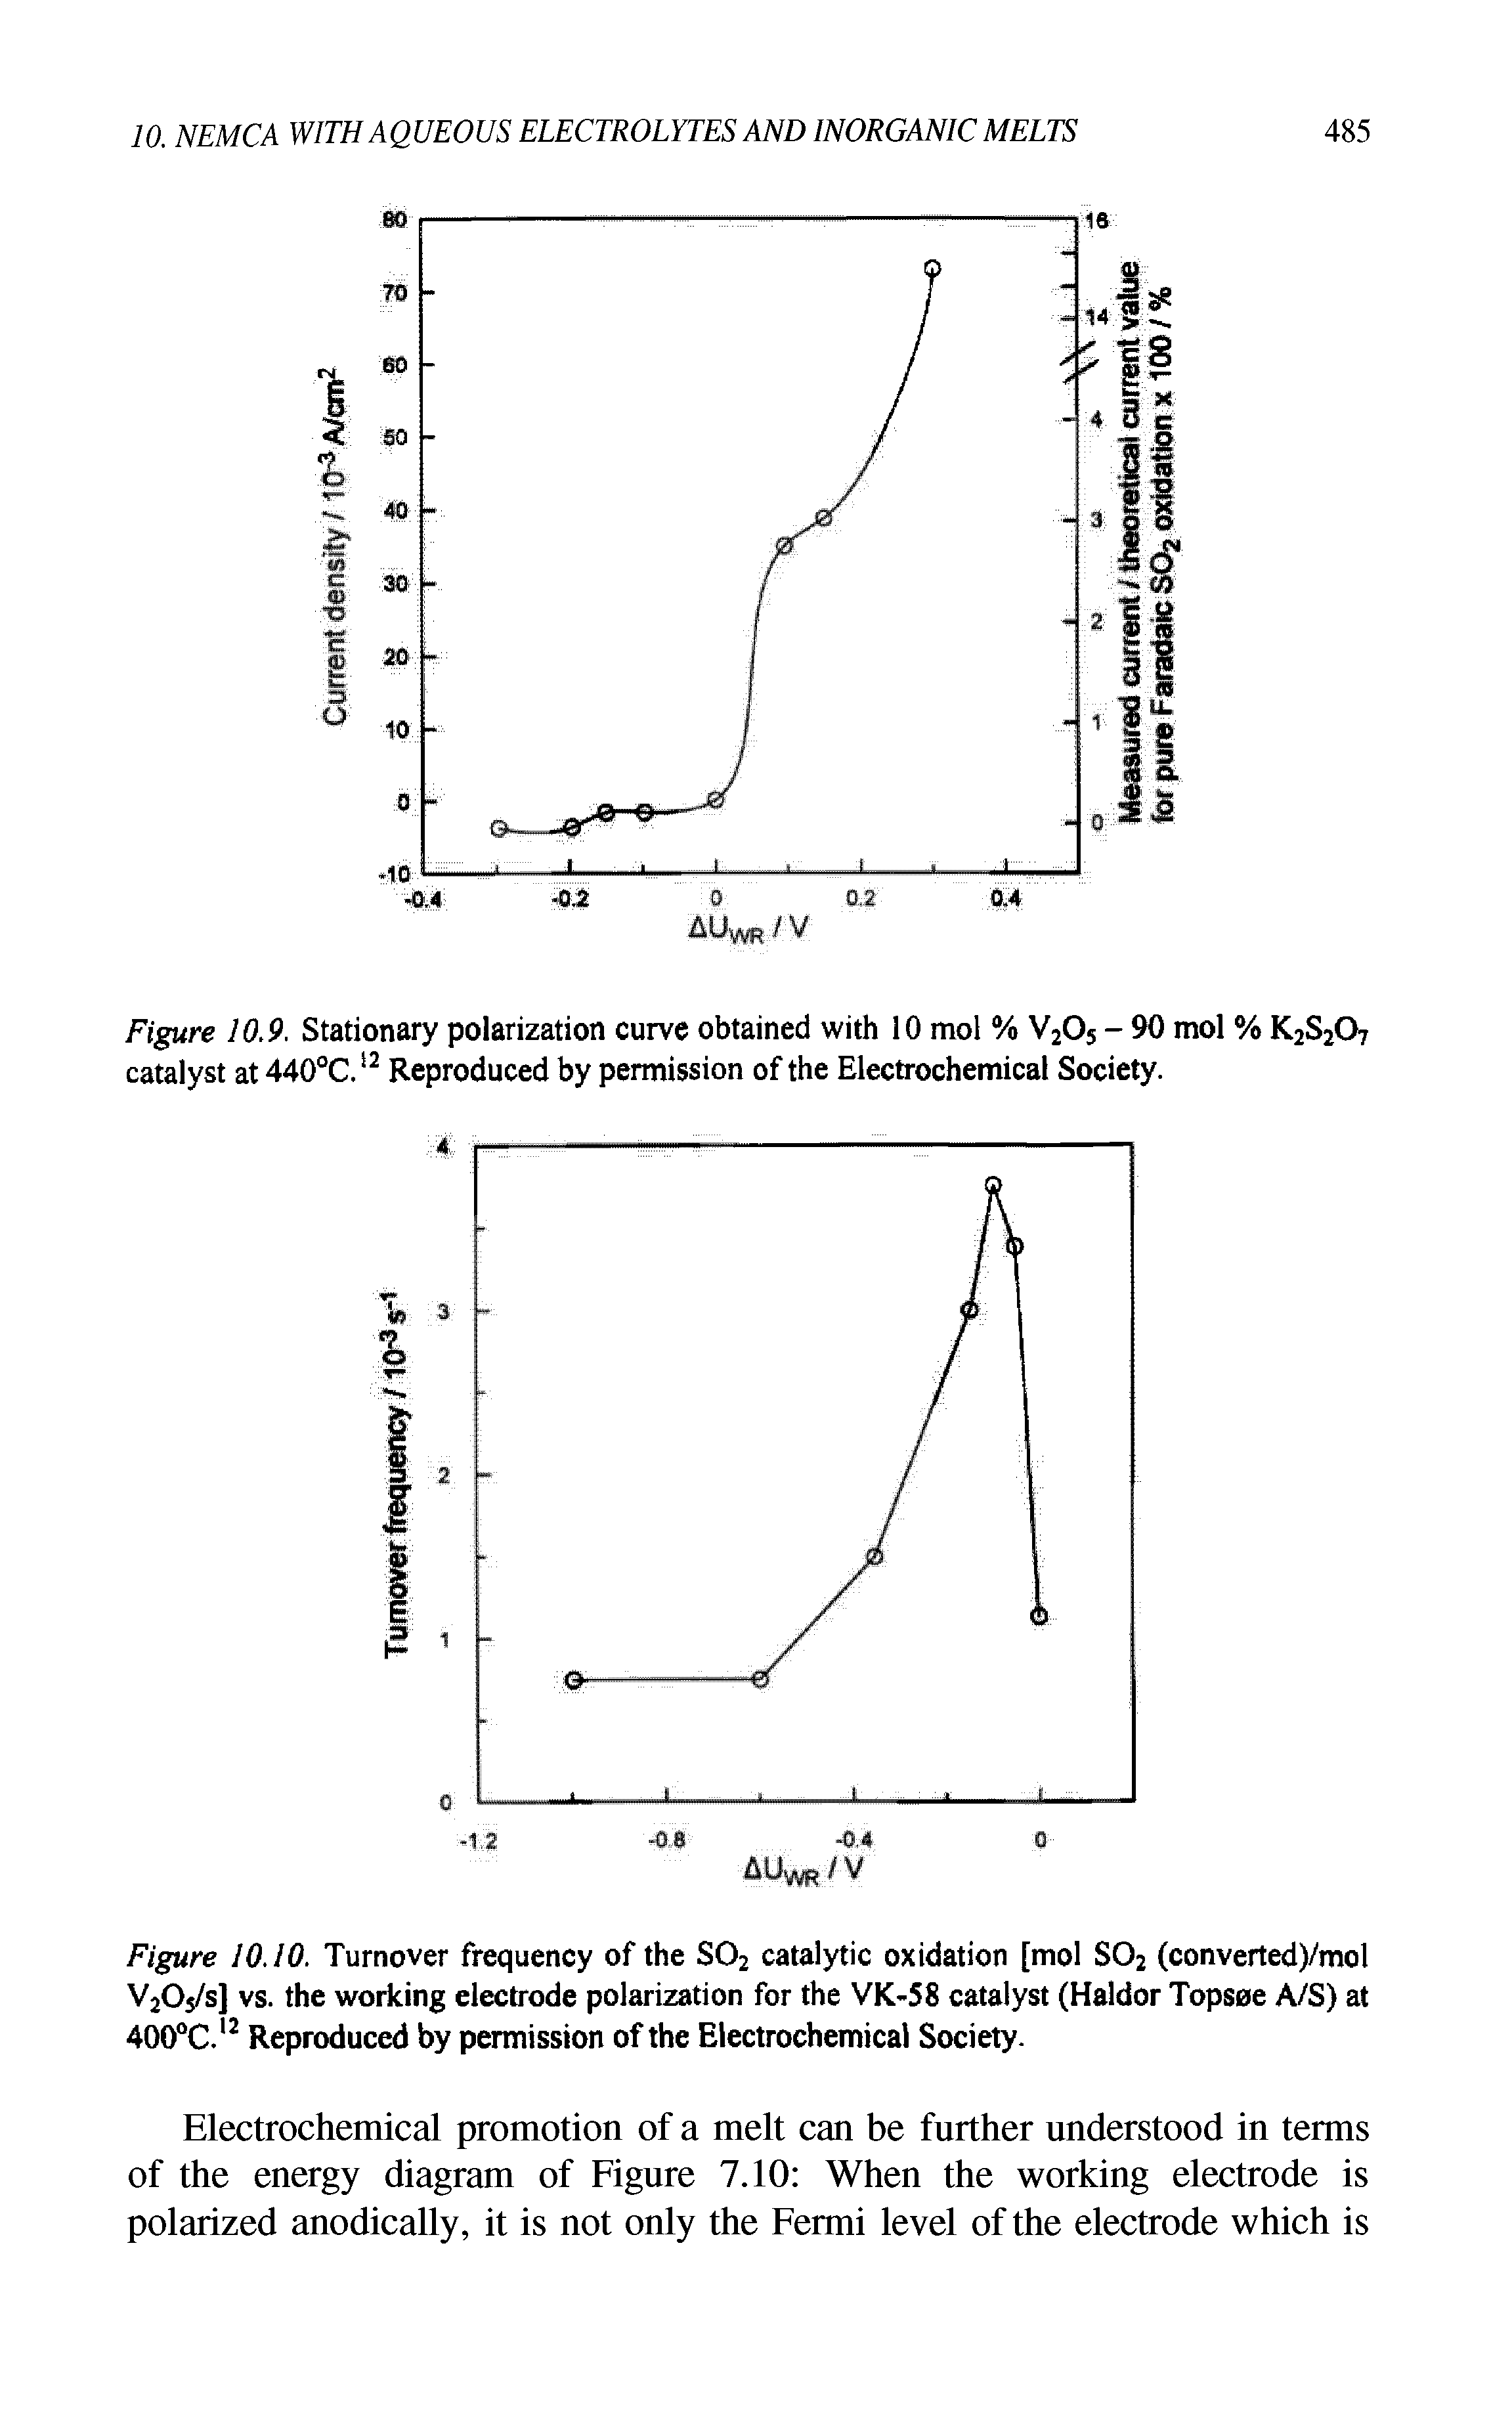 Figure 10.9. Stationary polarization curve obtained with 10 mol % V205 - 90 mol % K2S207 catalyst at 440°C. 2 Reproduced by permission of the Electrochemical Society.